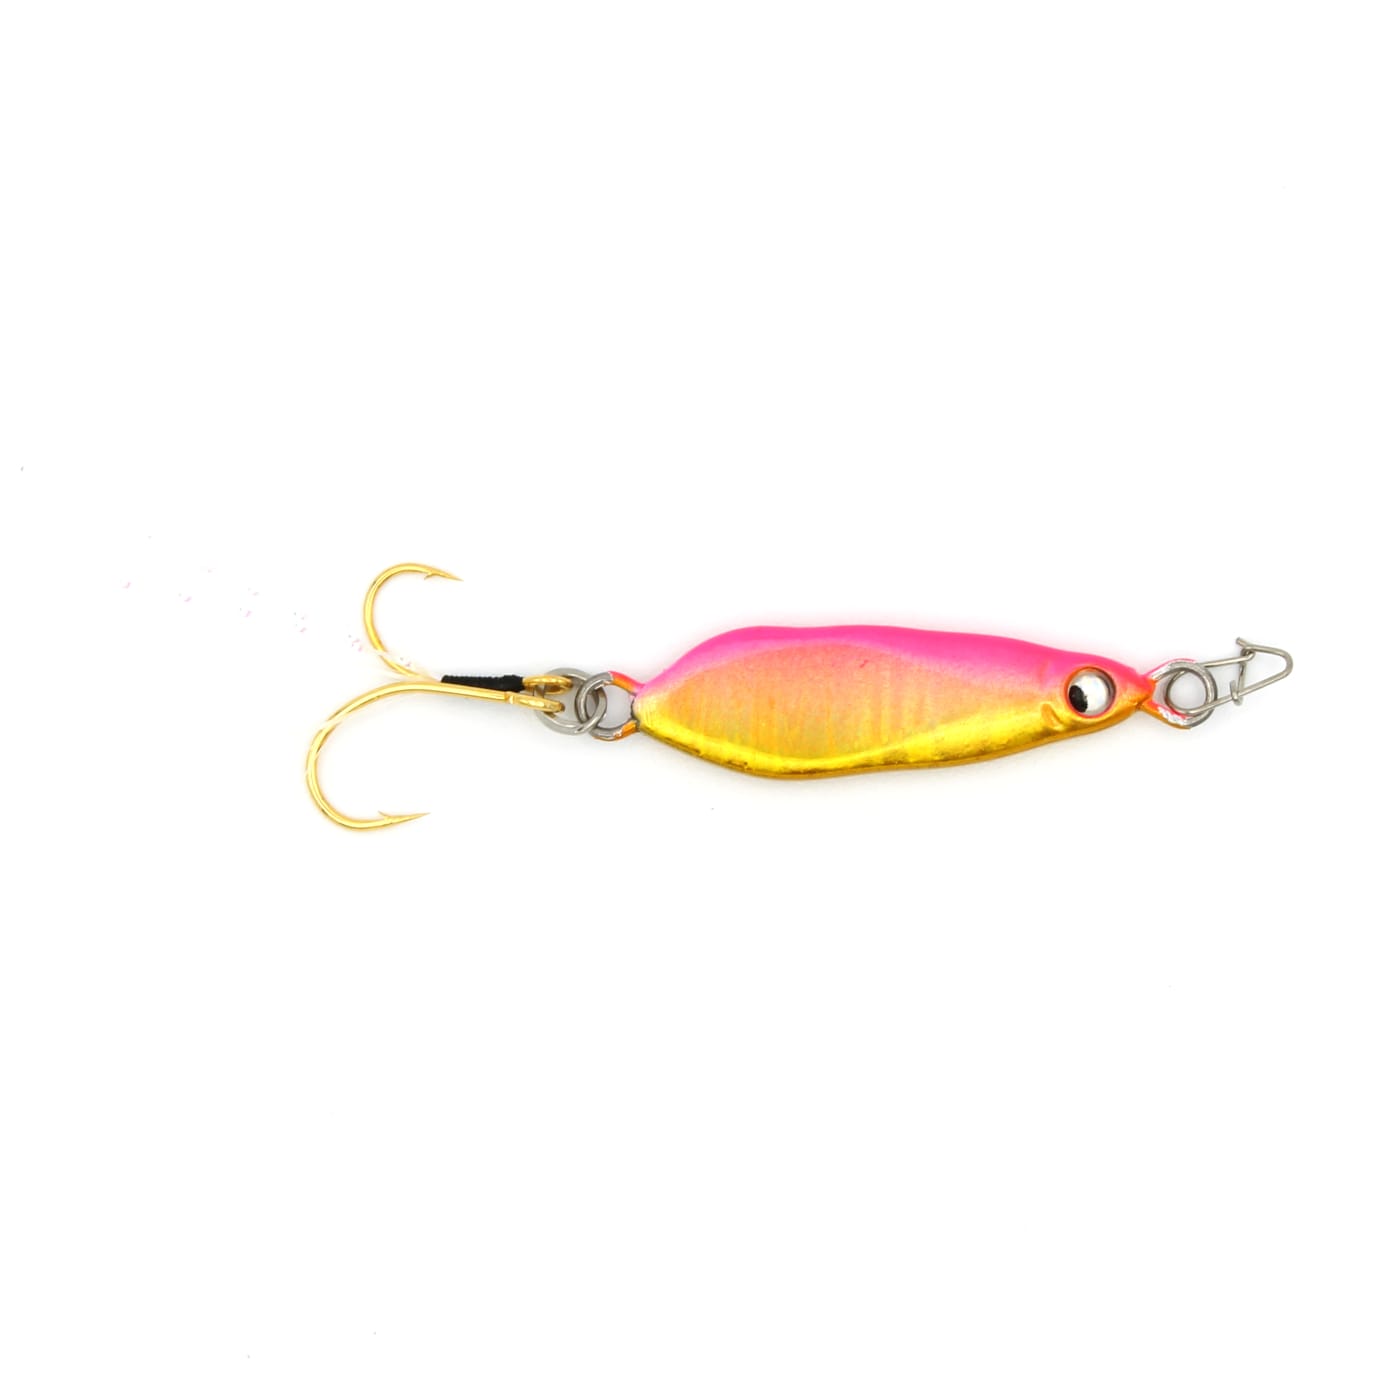 iFishband Thousand Jig - Micro Jigging/Casting Spoon - Bait Finesse Empire